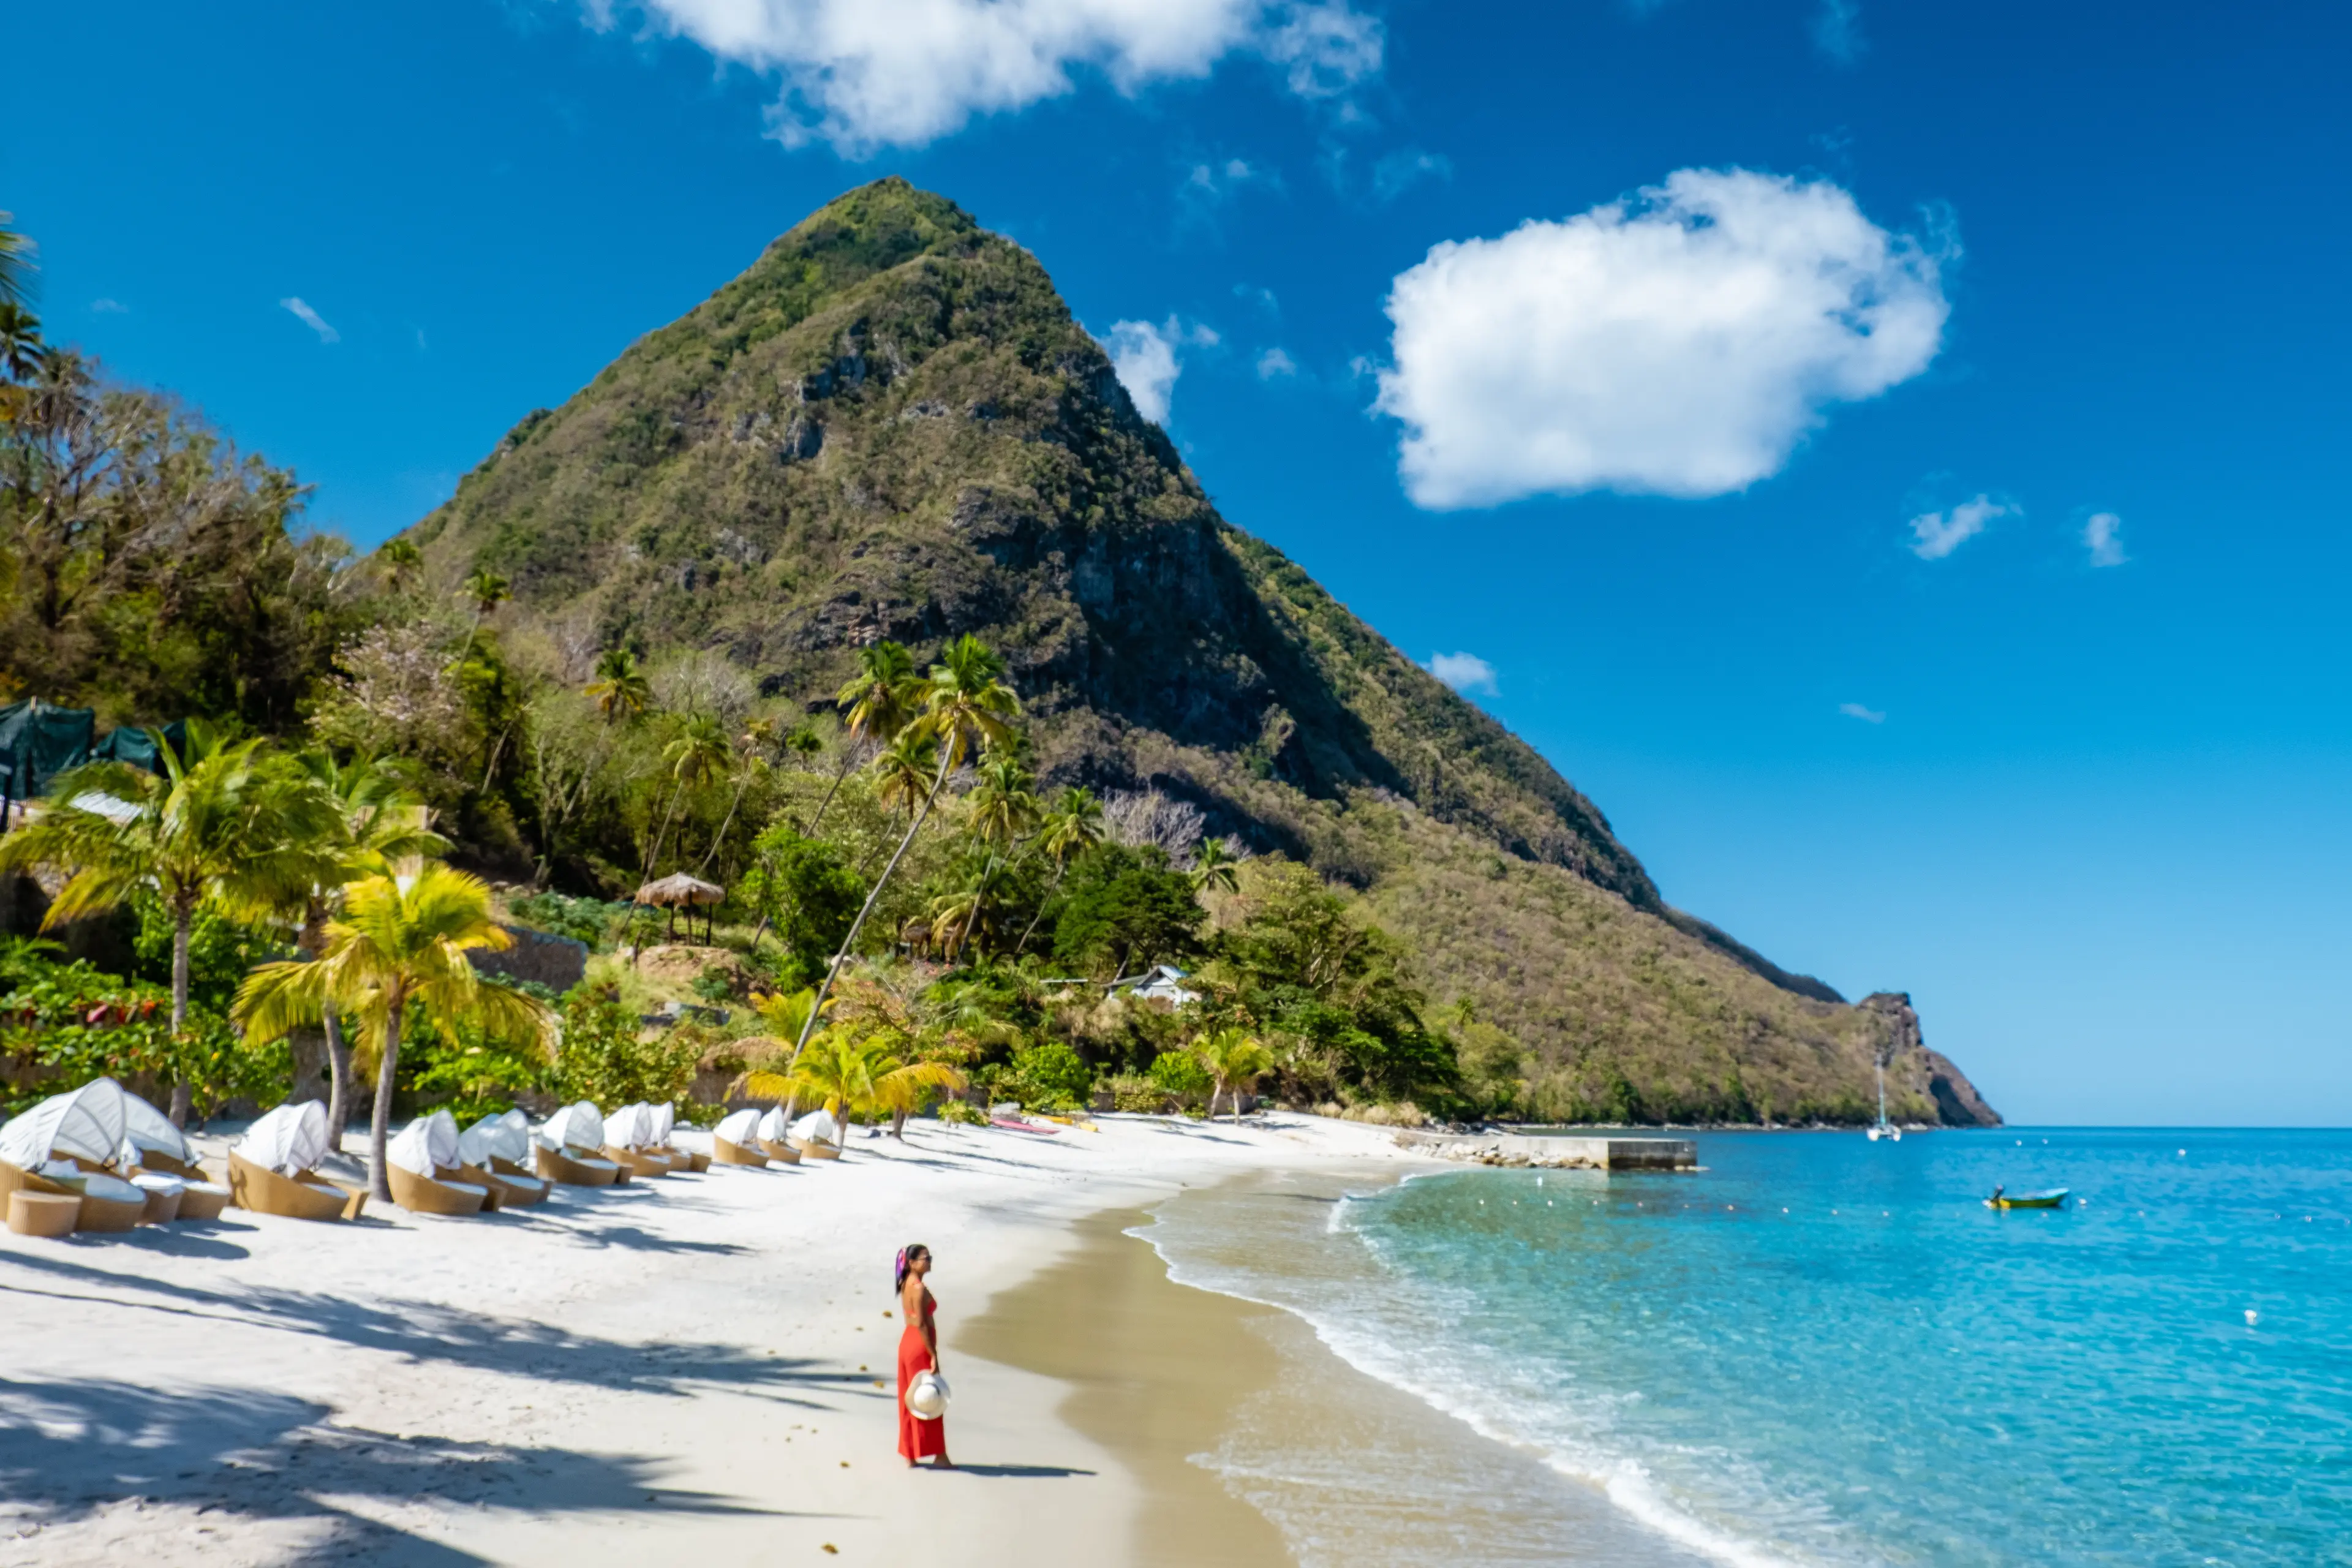 5-Day Exciting Adventure Itinerary in Saint Lucia